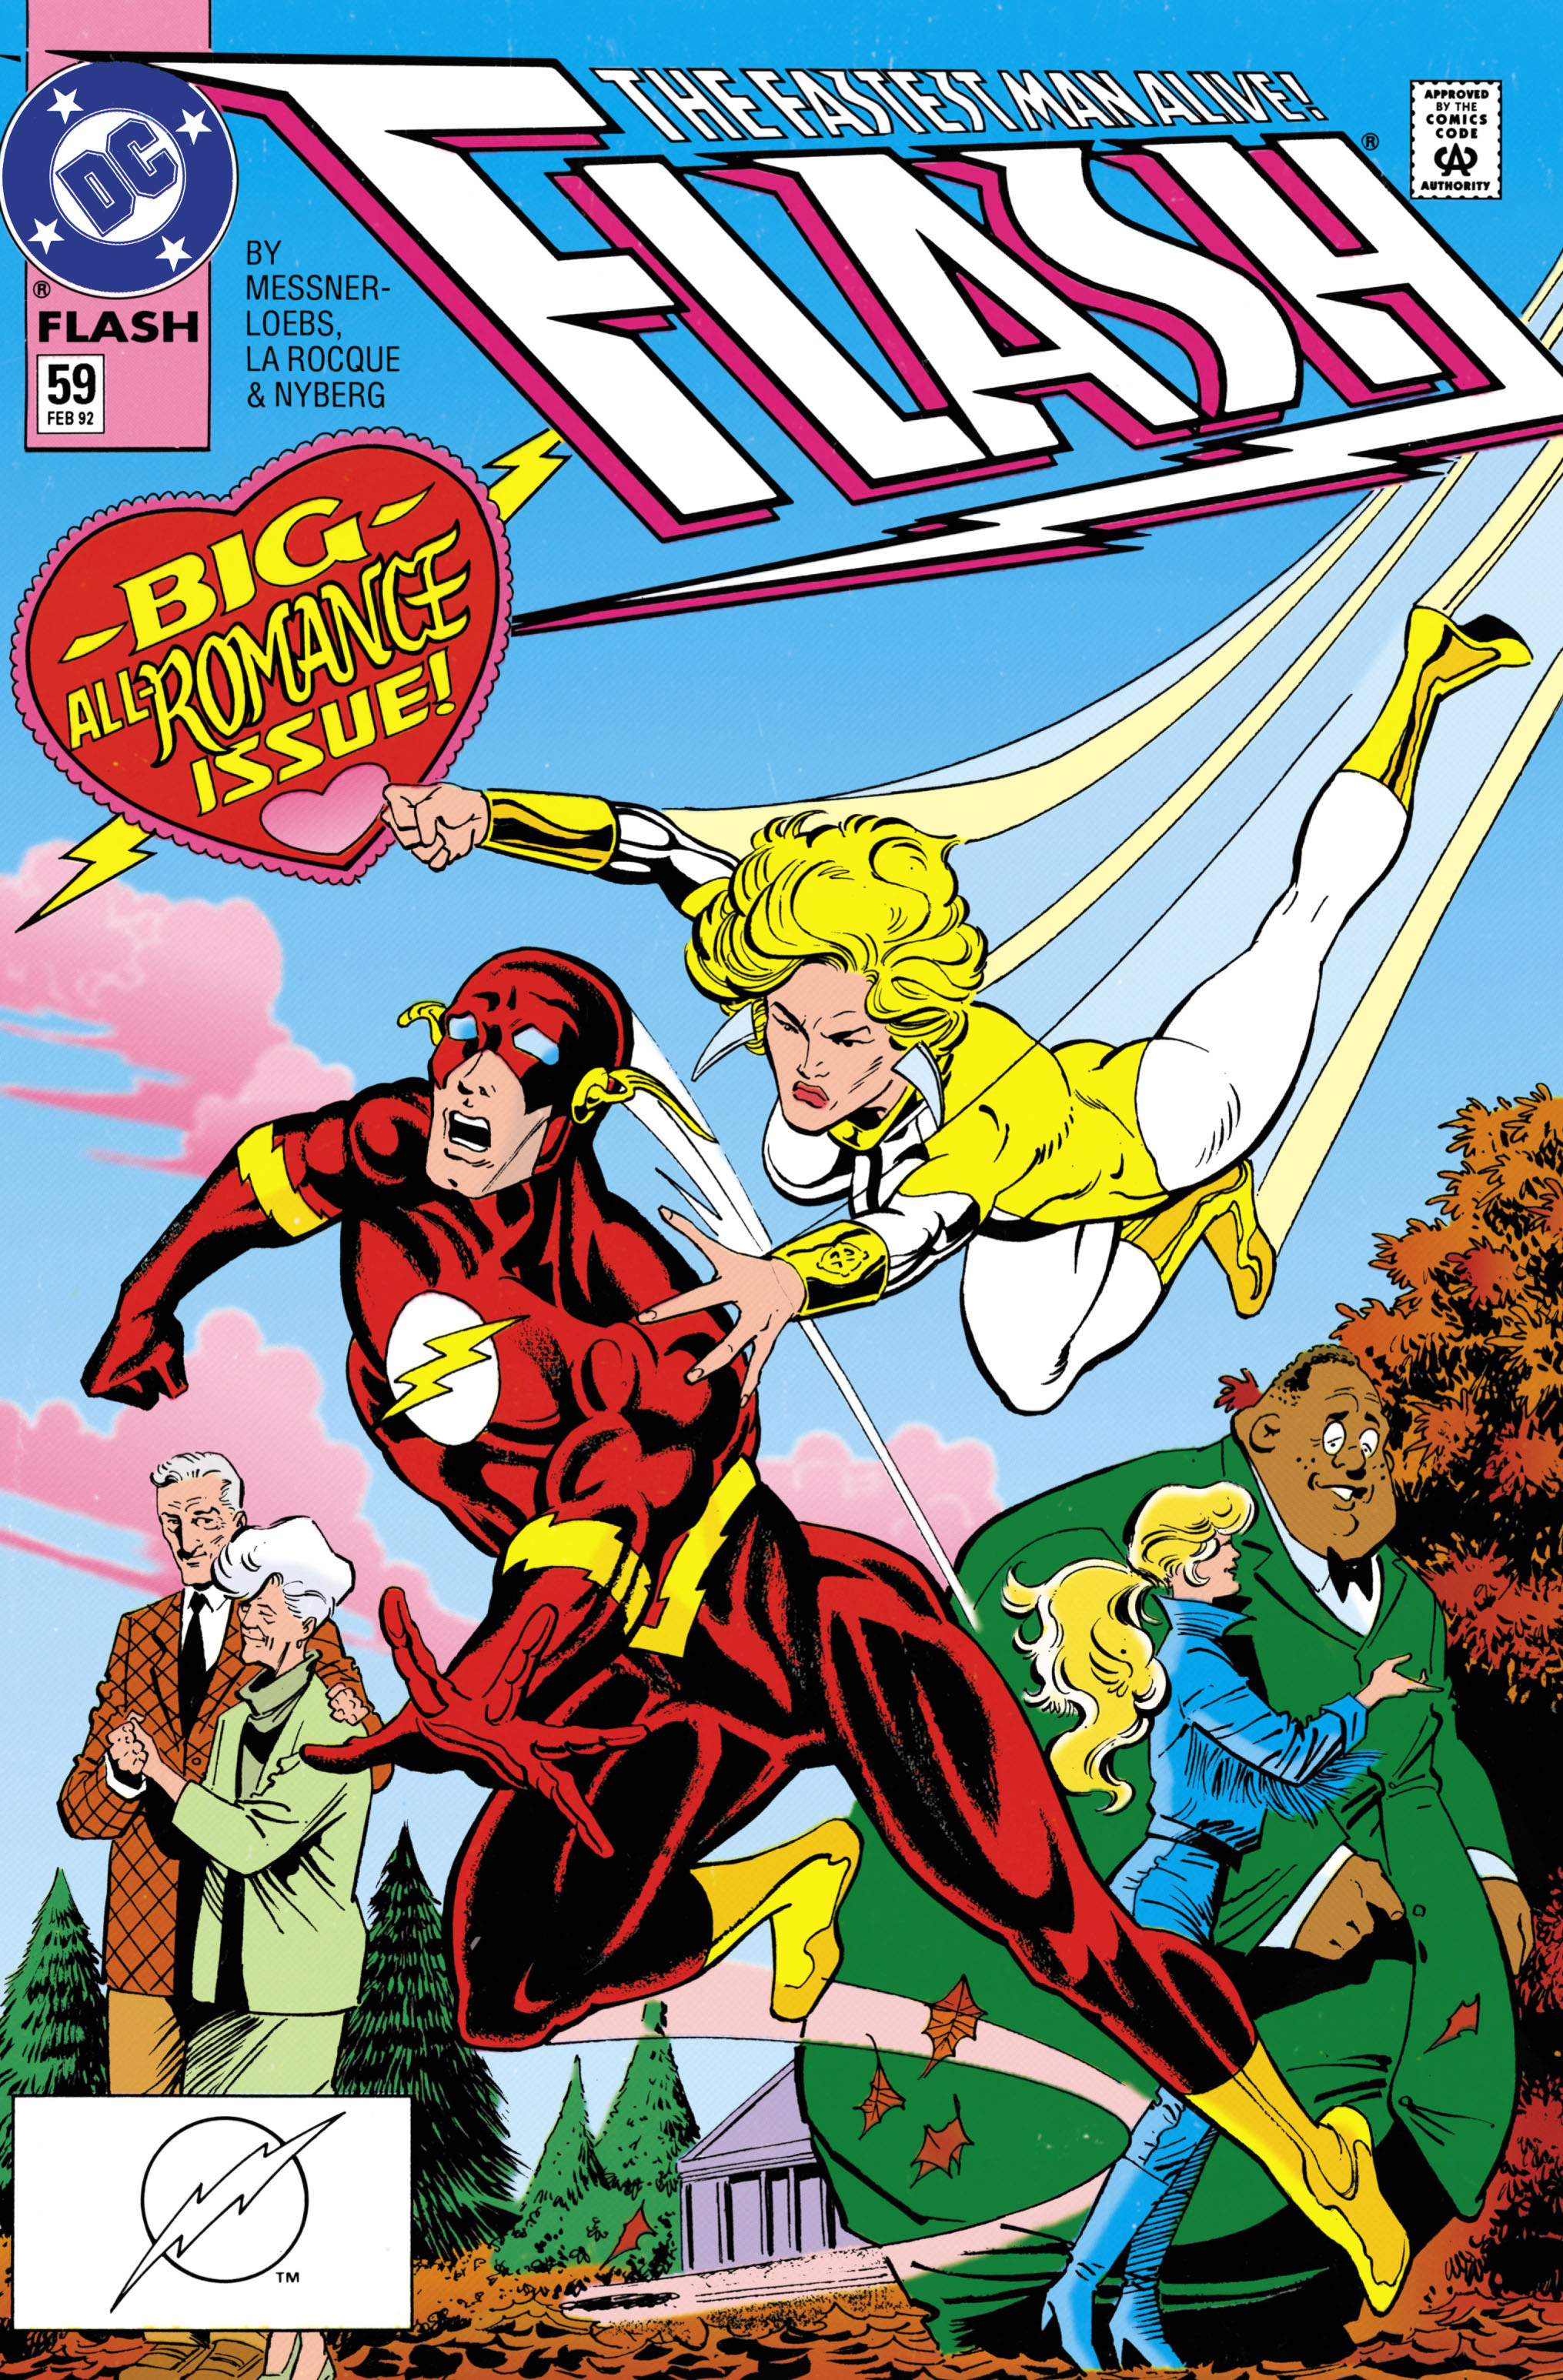 Read online The Flash (1987) comic -  Issue #59 - 1